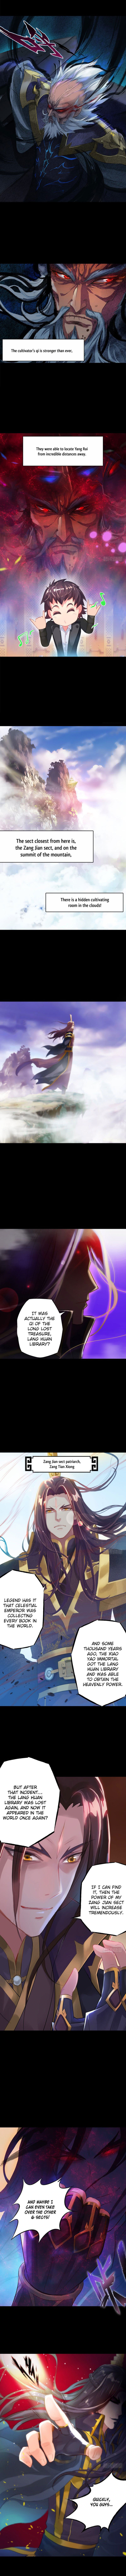 Lang Huan Library Chapter 1 page 10